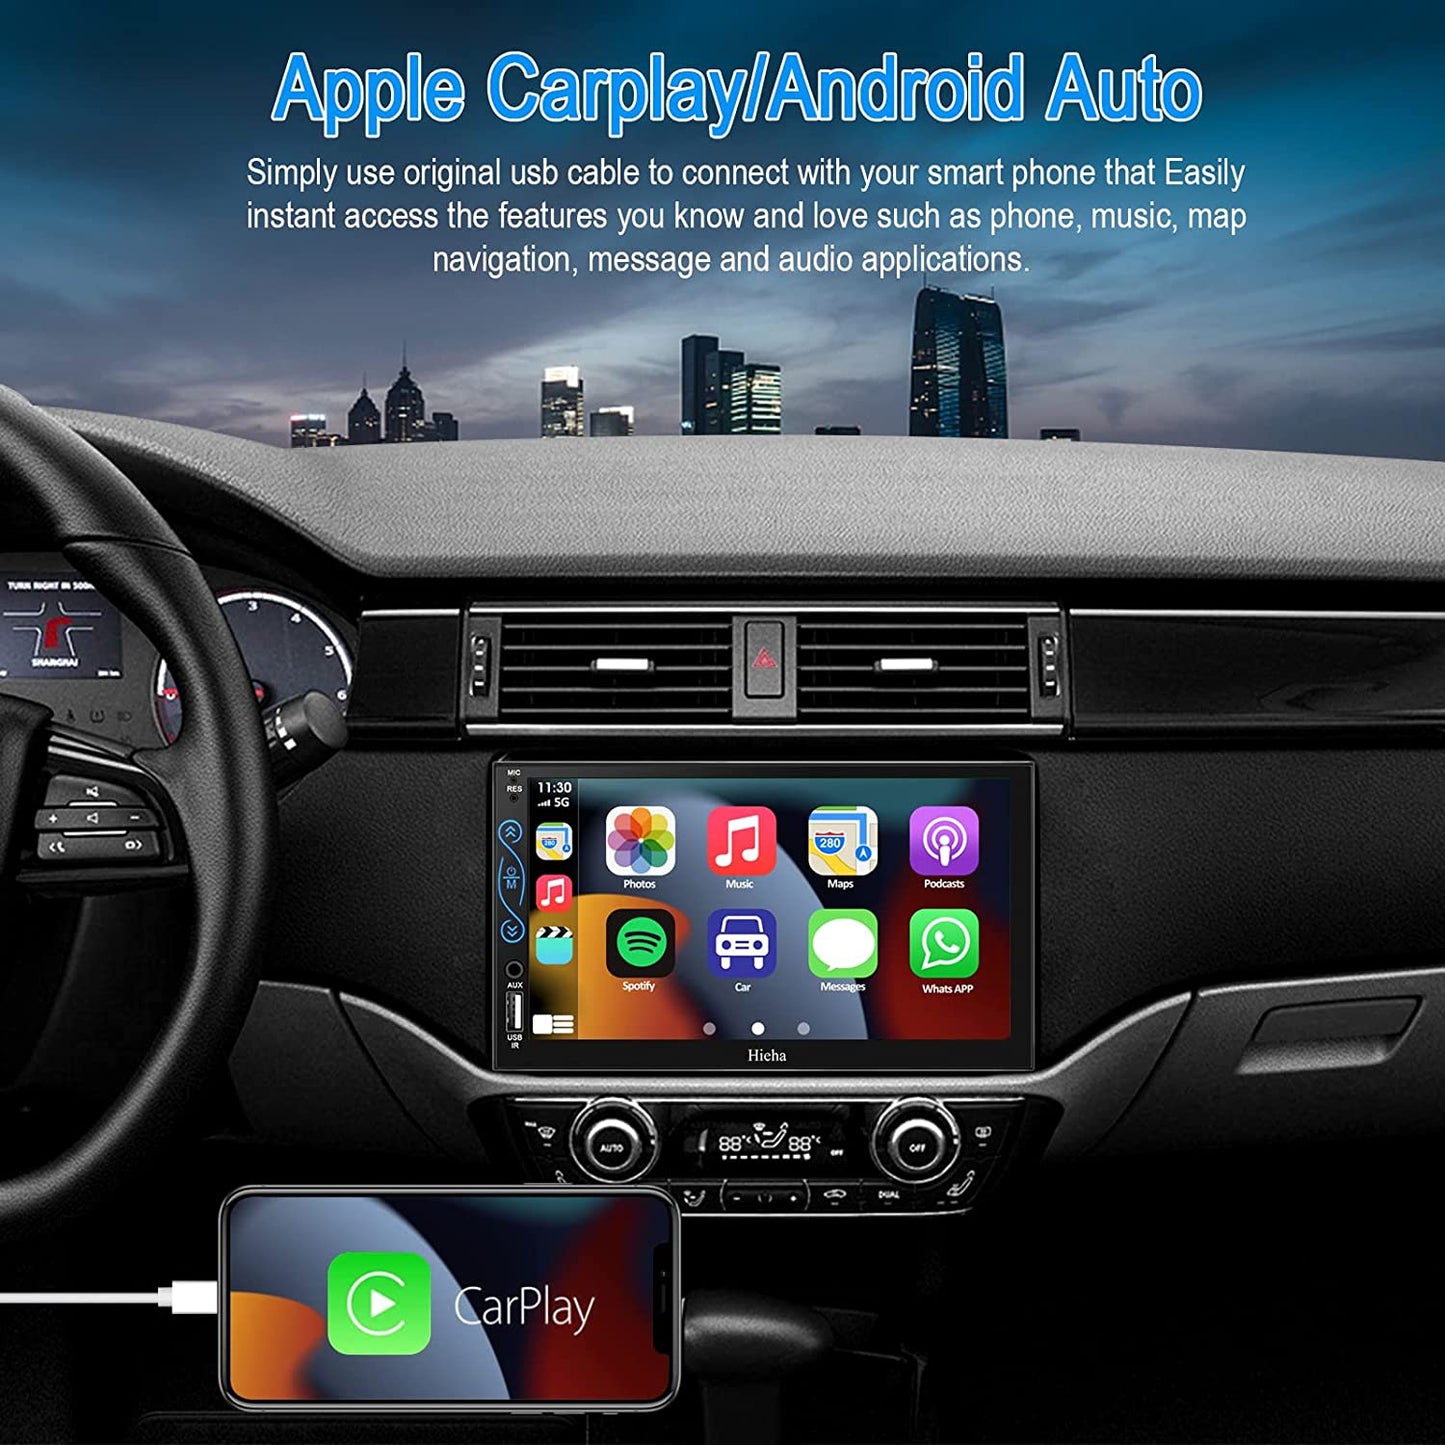 Hieha Car Stereo Compatible with Apple Carplay and Android Auto, 7 Inch Black